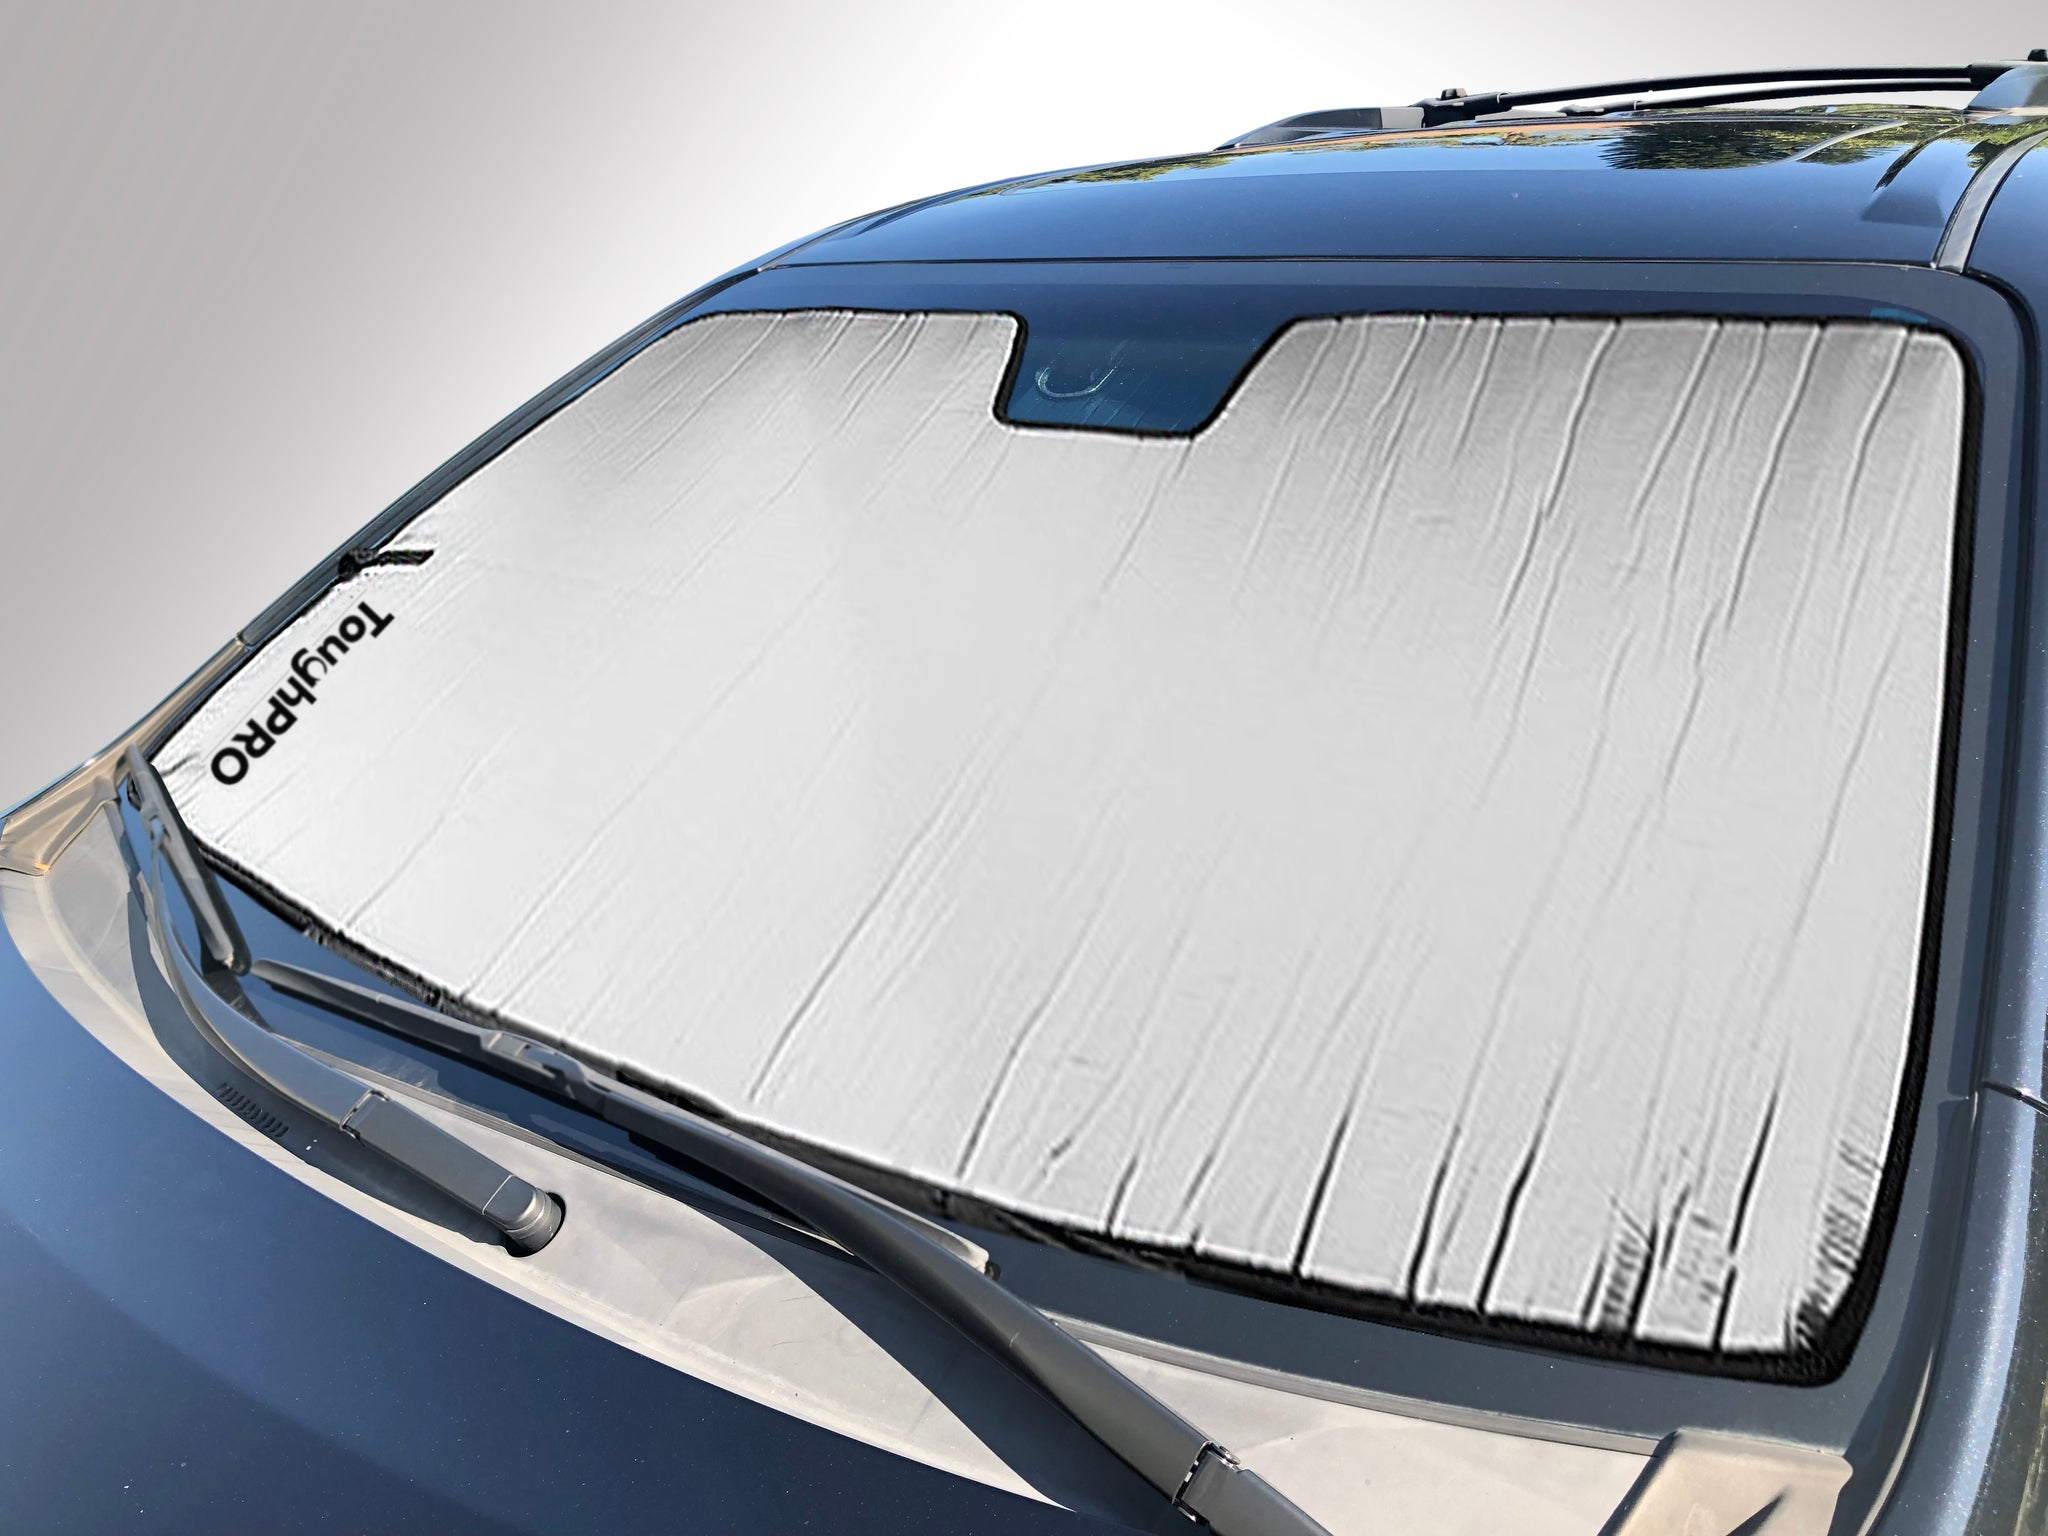 CUSTOM FIT FOR LEXUS NX200T 2016 Sun Shade (without sensor)